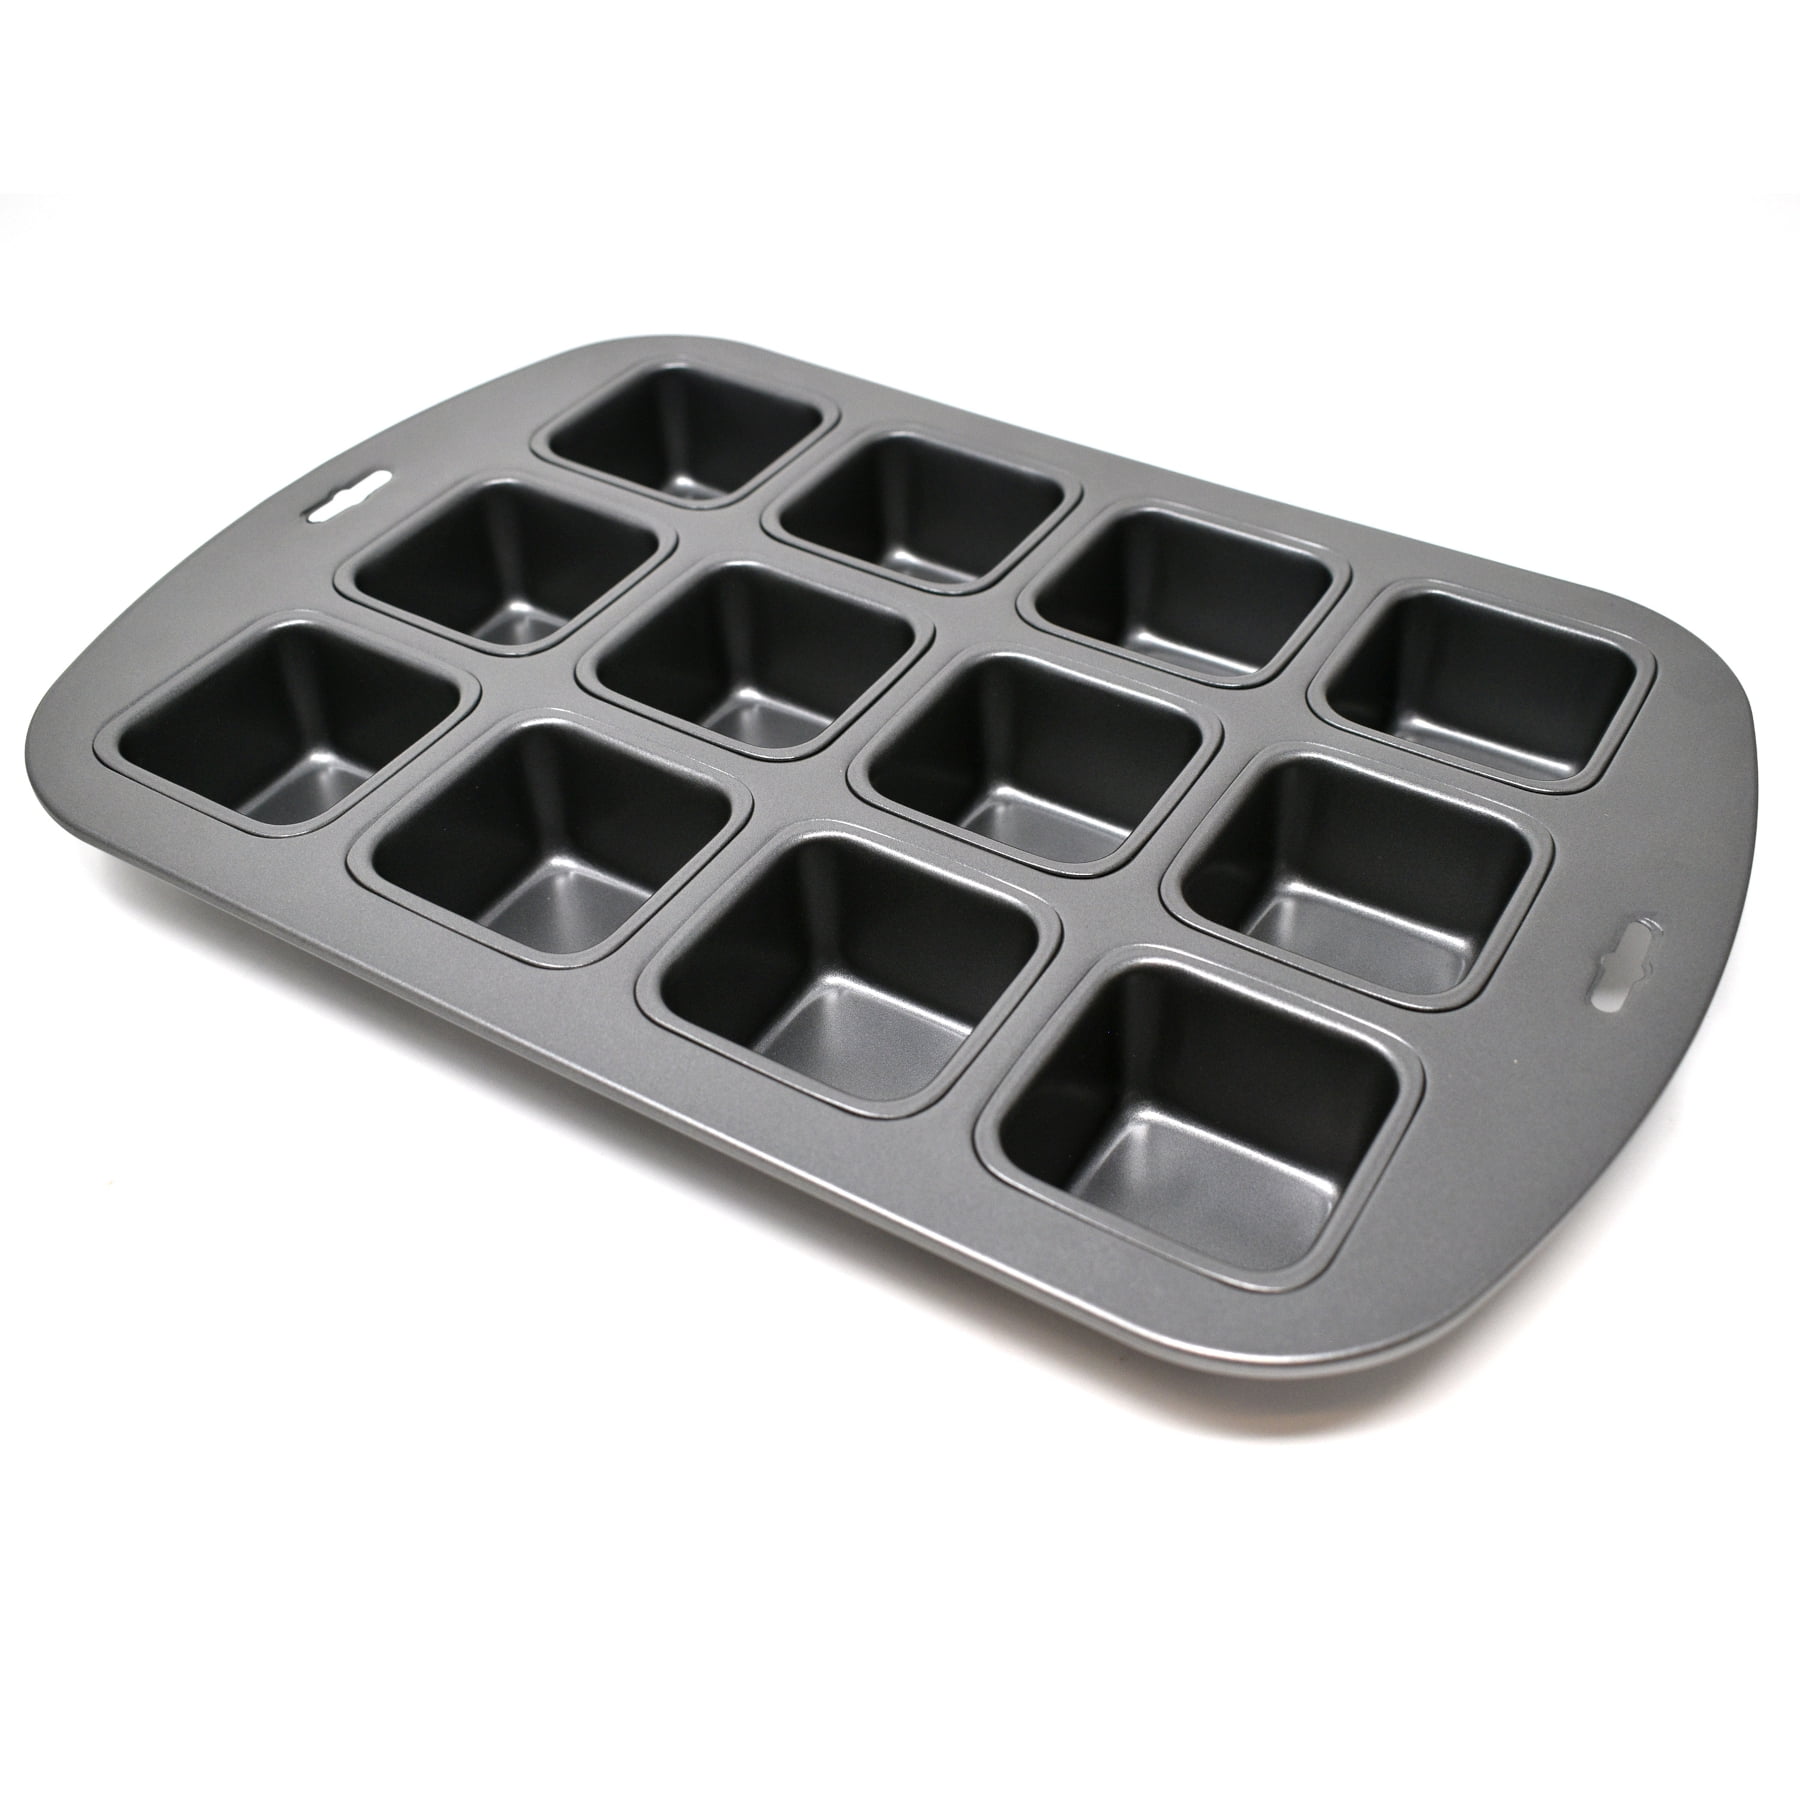 NDSWKR 2 Pack 12 Cavity Brownie Pan with Dividers, Non-Stick Square Muffin  Pan, All Edges Baking Pan for Cornbread, Cupcakes, Tart, Muffin Cakes